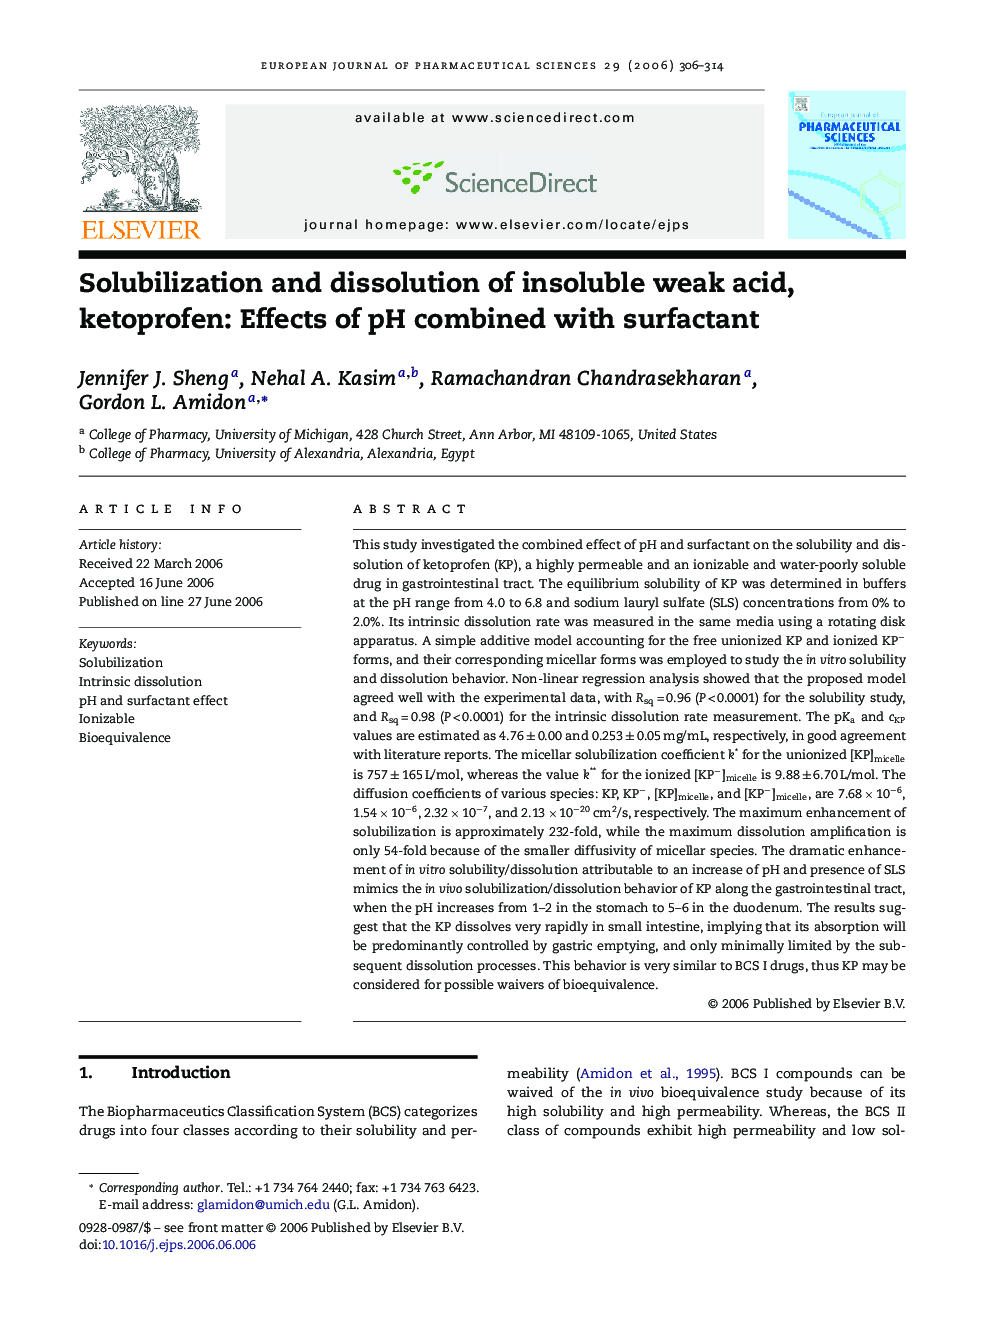 Solubilization and dissolution of insoluble weak acid, ketoprofen: Effects of pH combined with surfactant